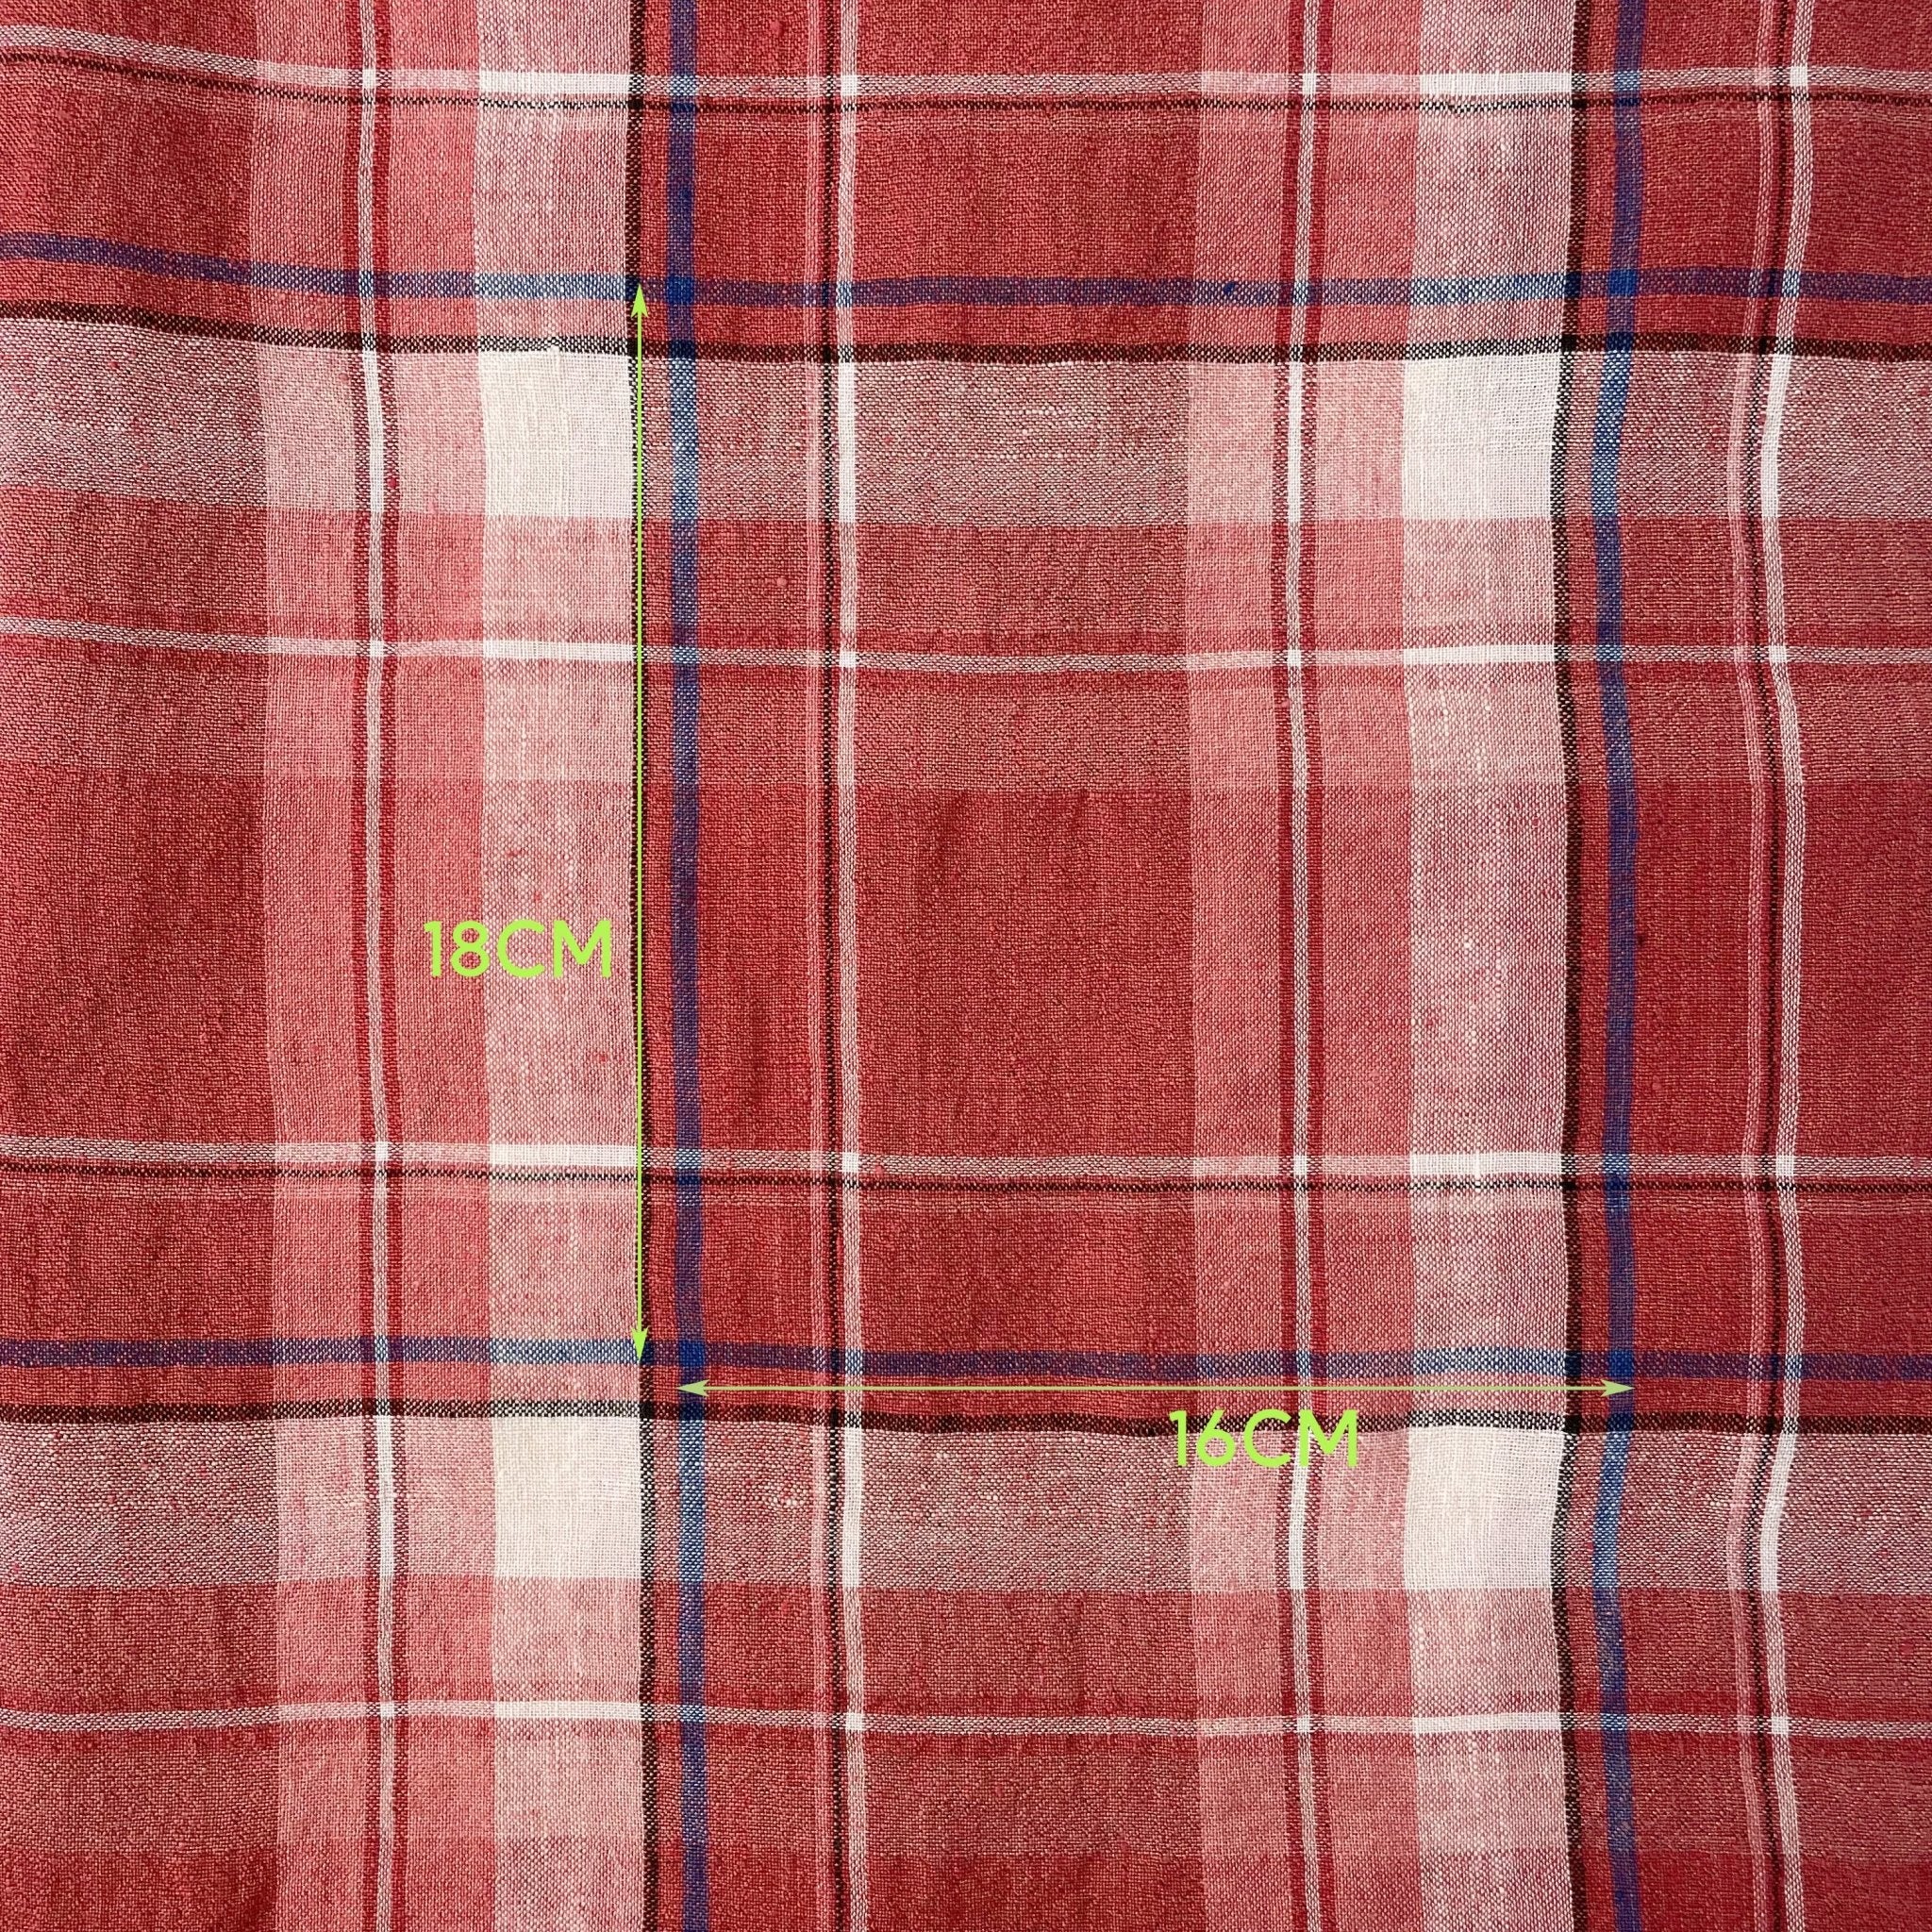 Linen Cotton Polyester Red Check Fabric (7159) - The Linen Lab - Red